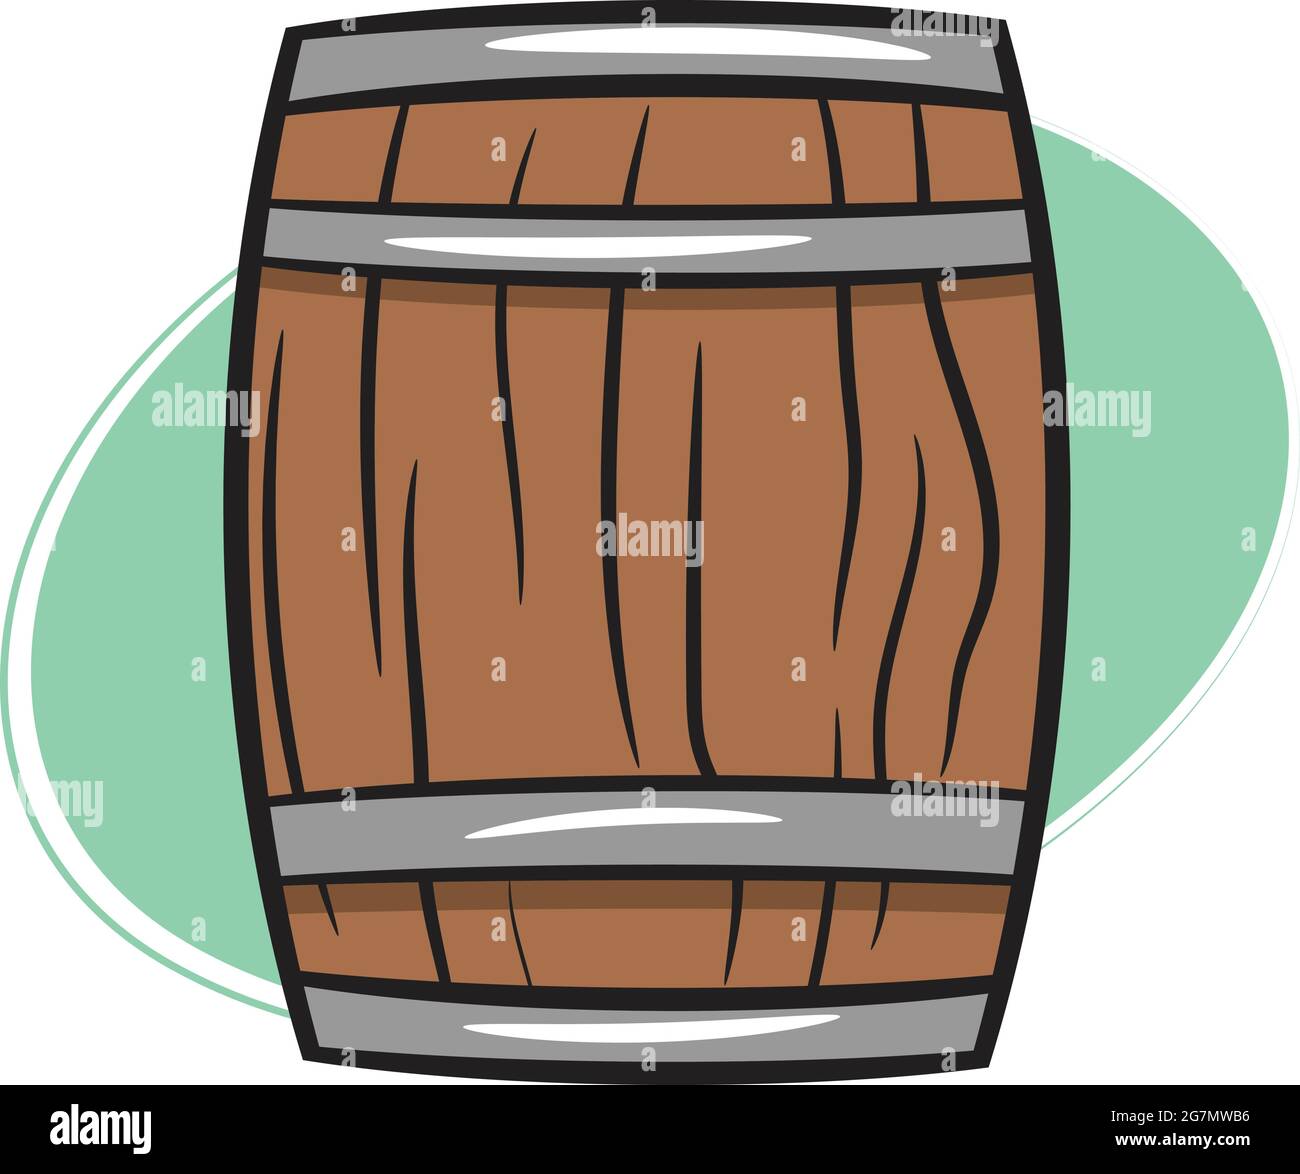 An old barrel or cask made of wood used to store whiskey. Wild West Texas Country graphic elements. Cowboy Vector Elements Isolated on White Stock Vector